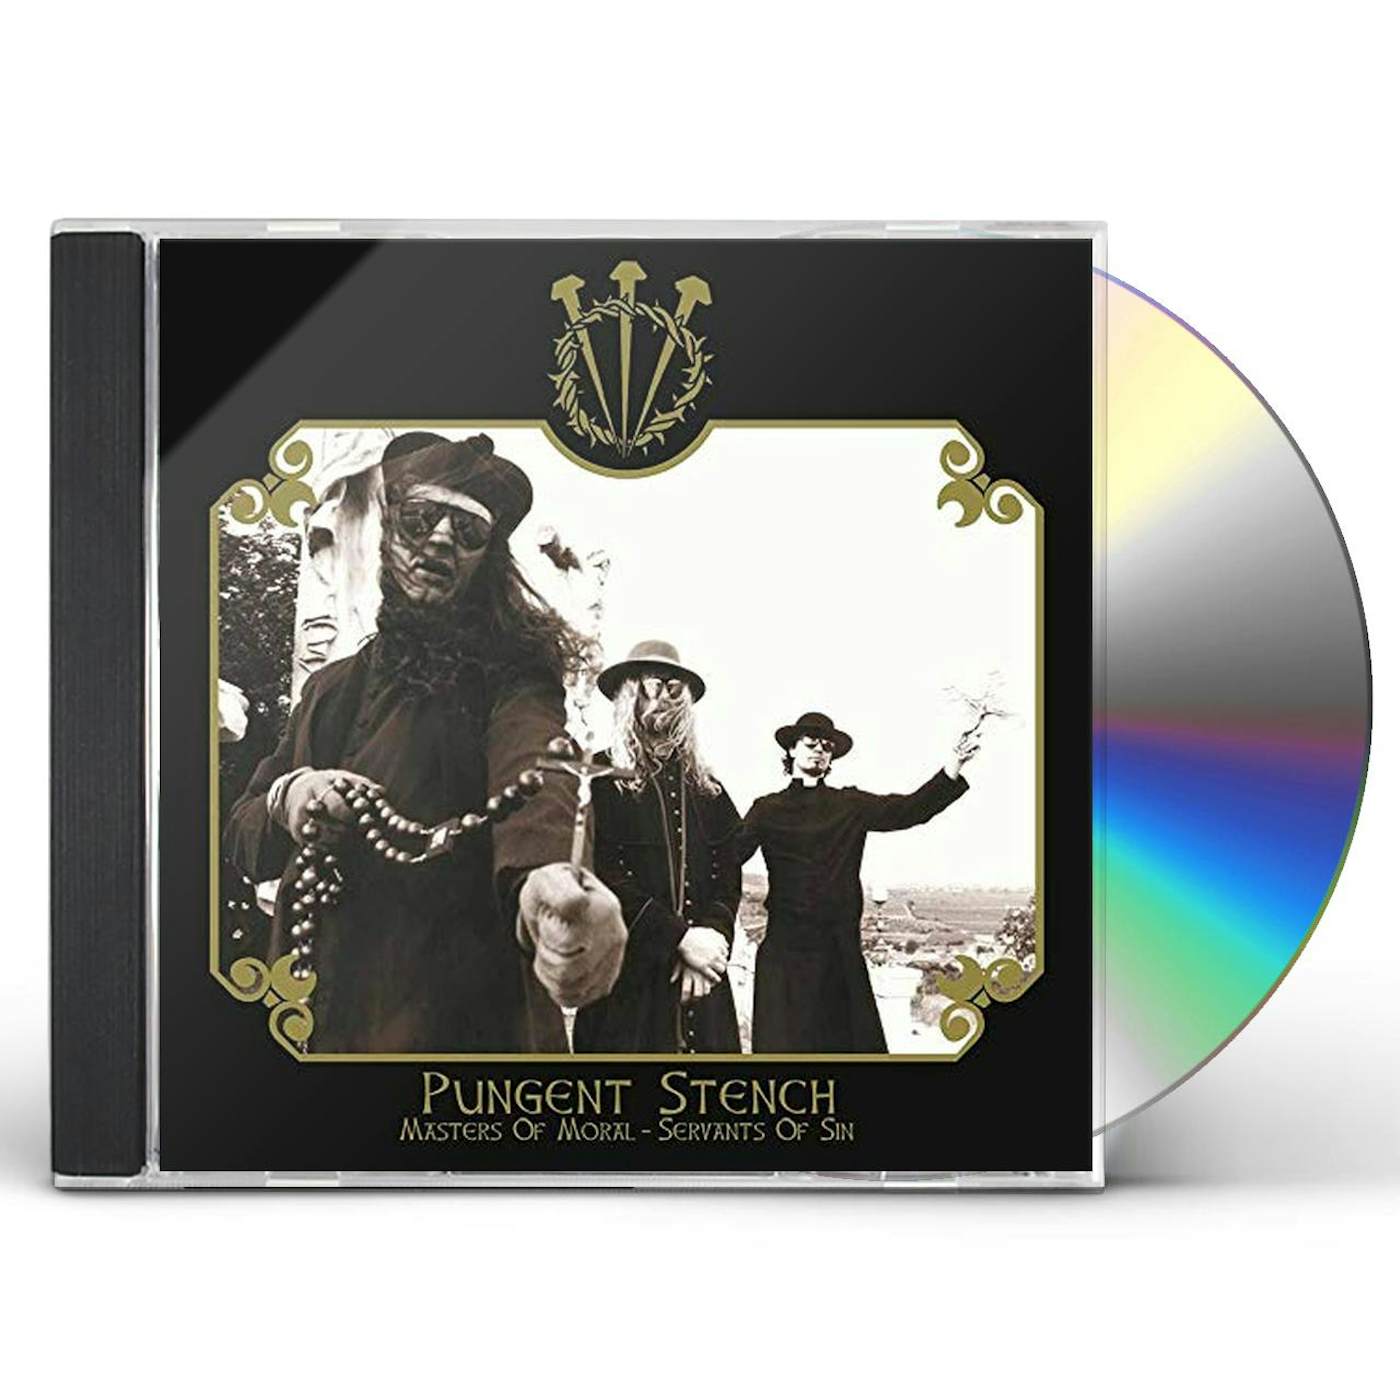 Pungent Stench MASTERS OF MORAL - SERVANTS OF SIN CD